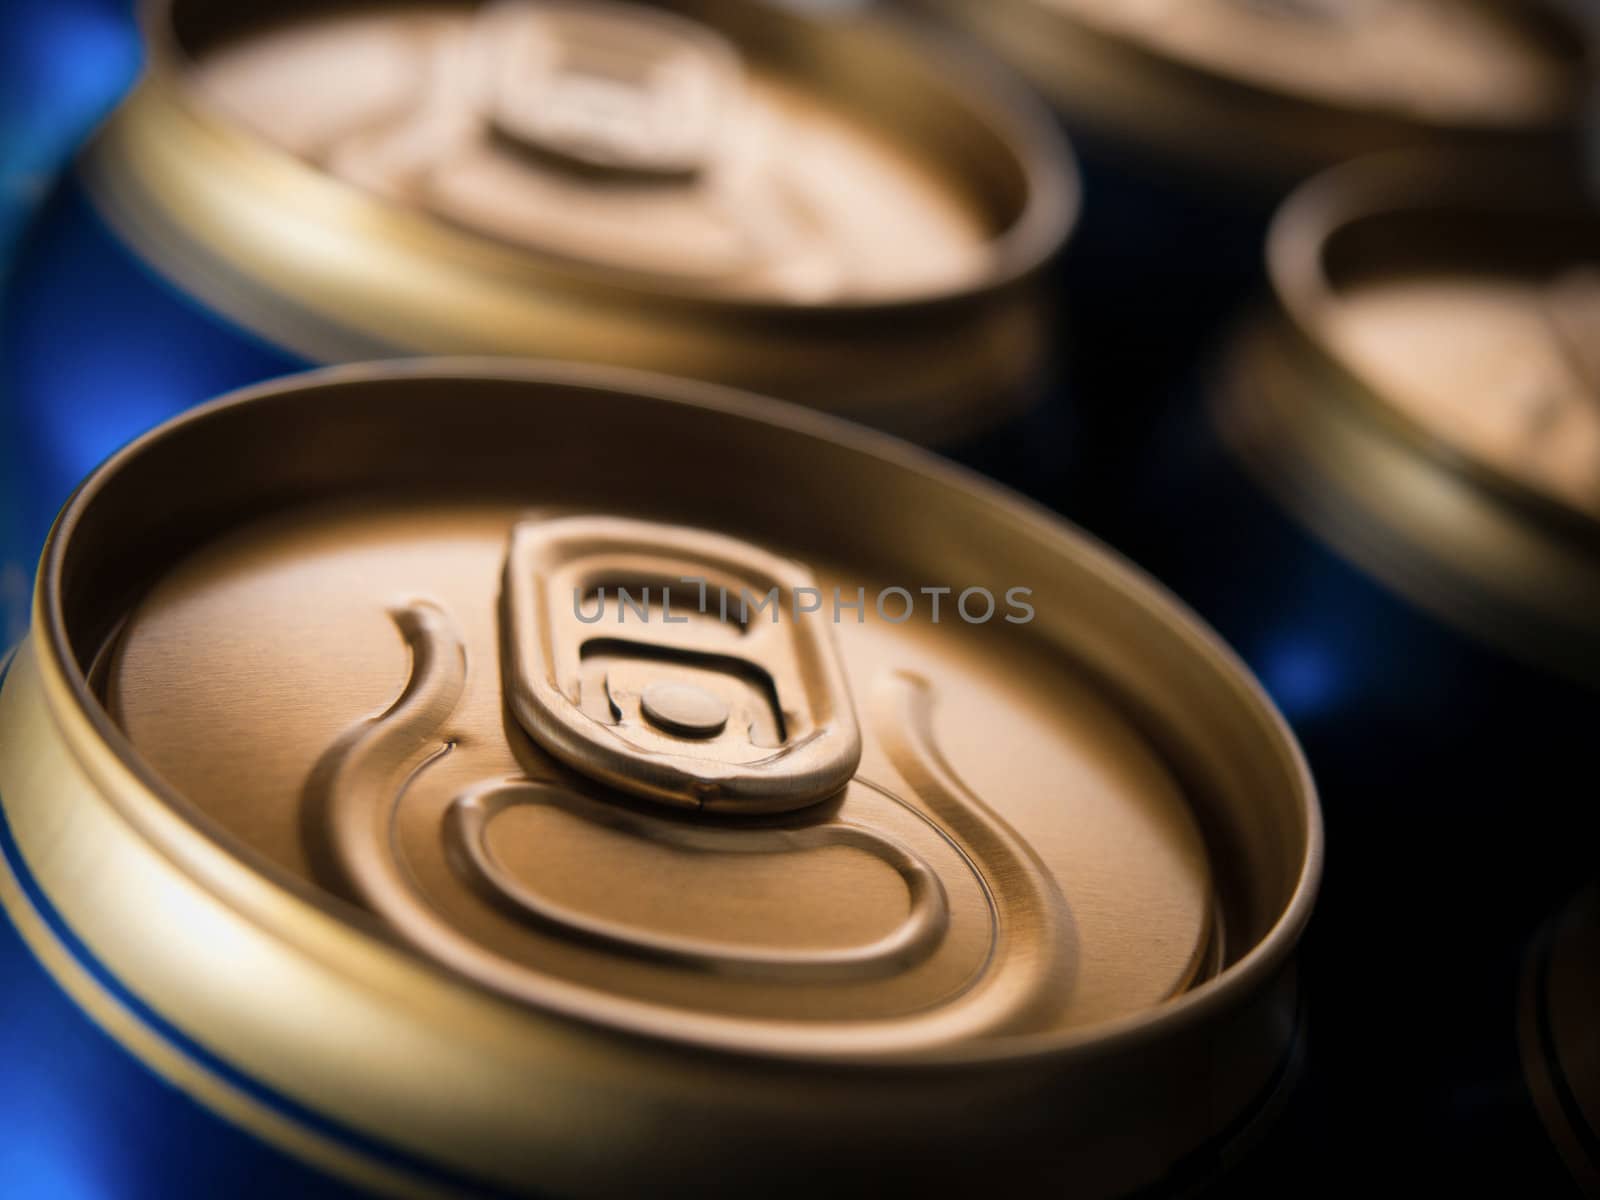 Top part of beer cans, close up view